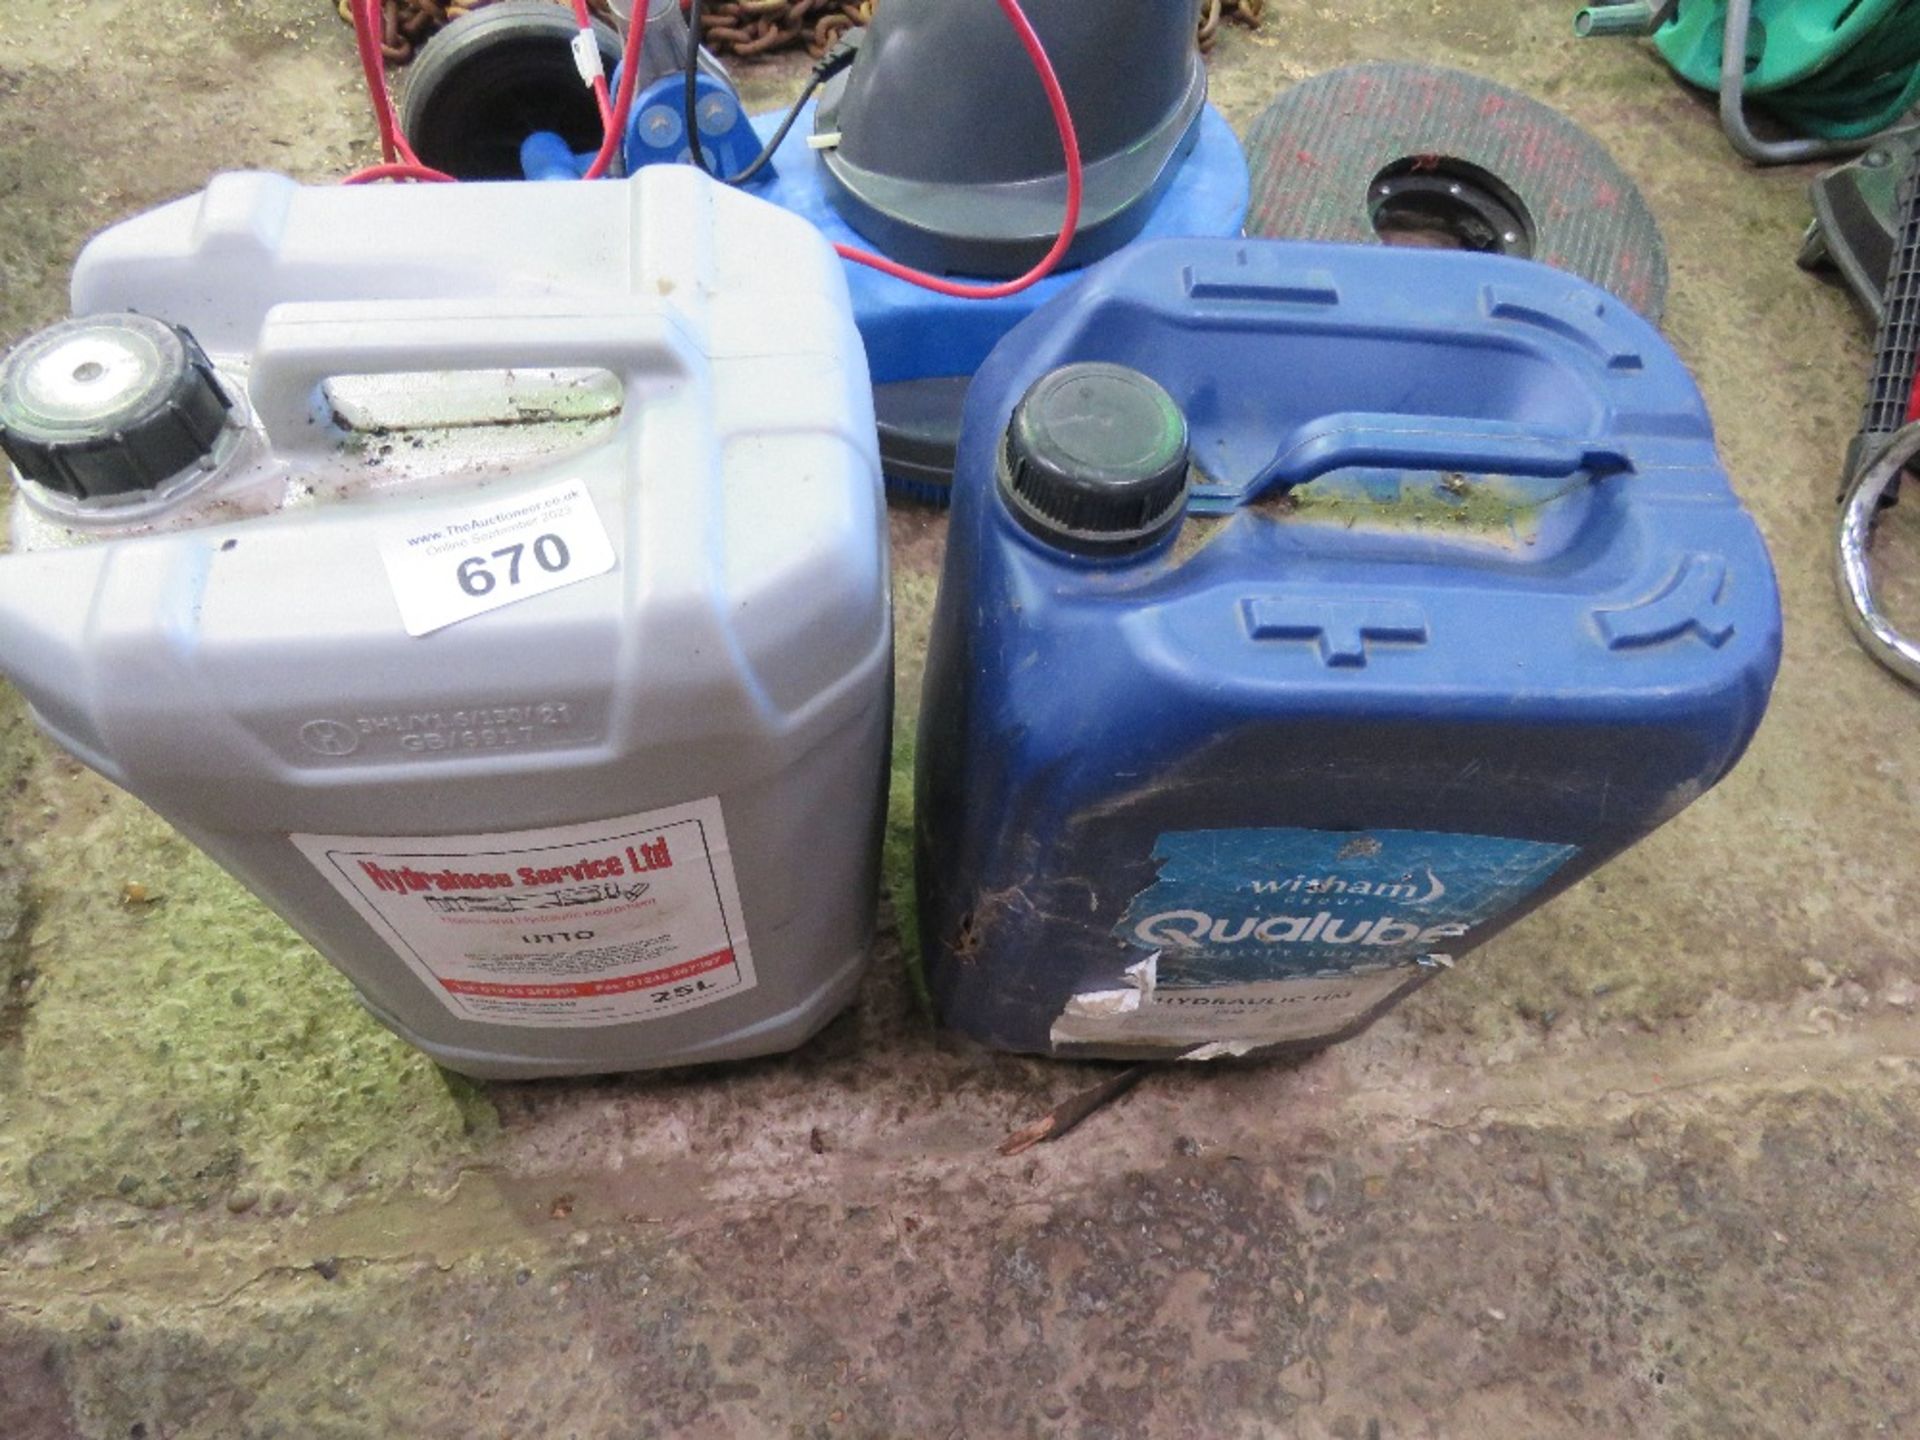 2 X DRUMS OF HYDRAULIC OIL, FEEL NEARLY FULL. DIRECT FROM LOCAL LANDSCAPE COMPANY WHO ARE CLOSING A